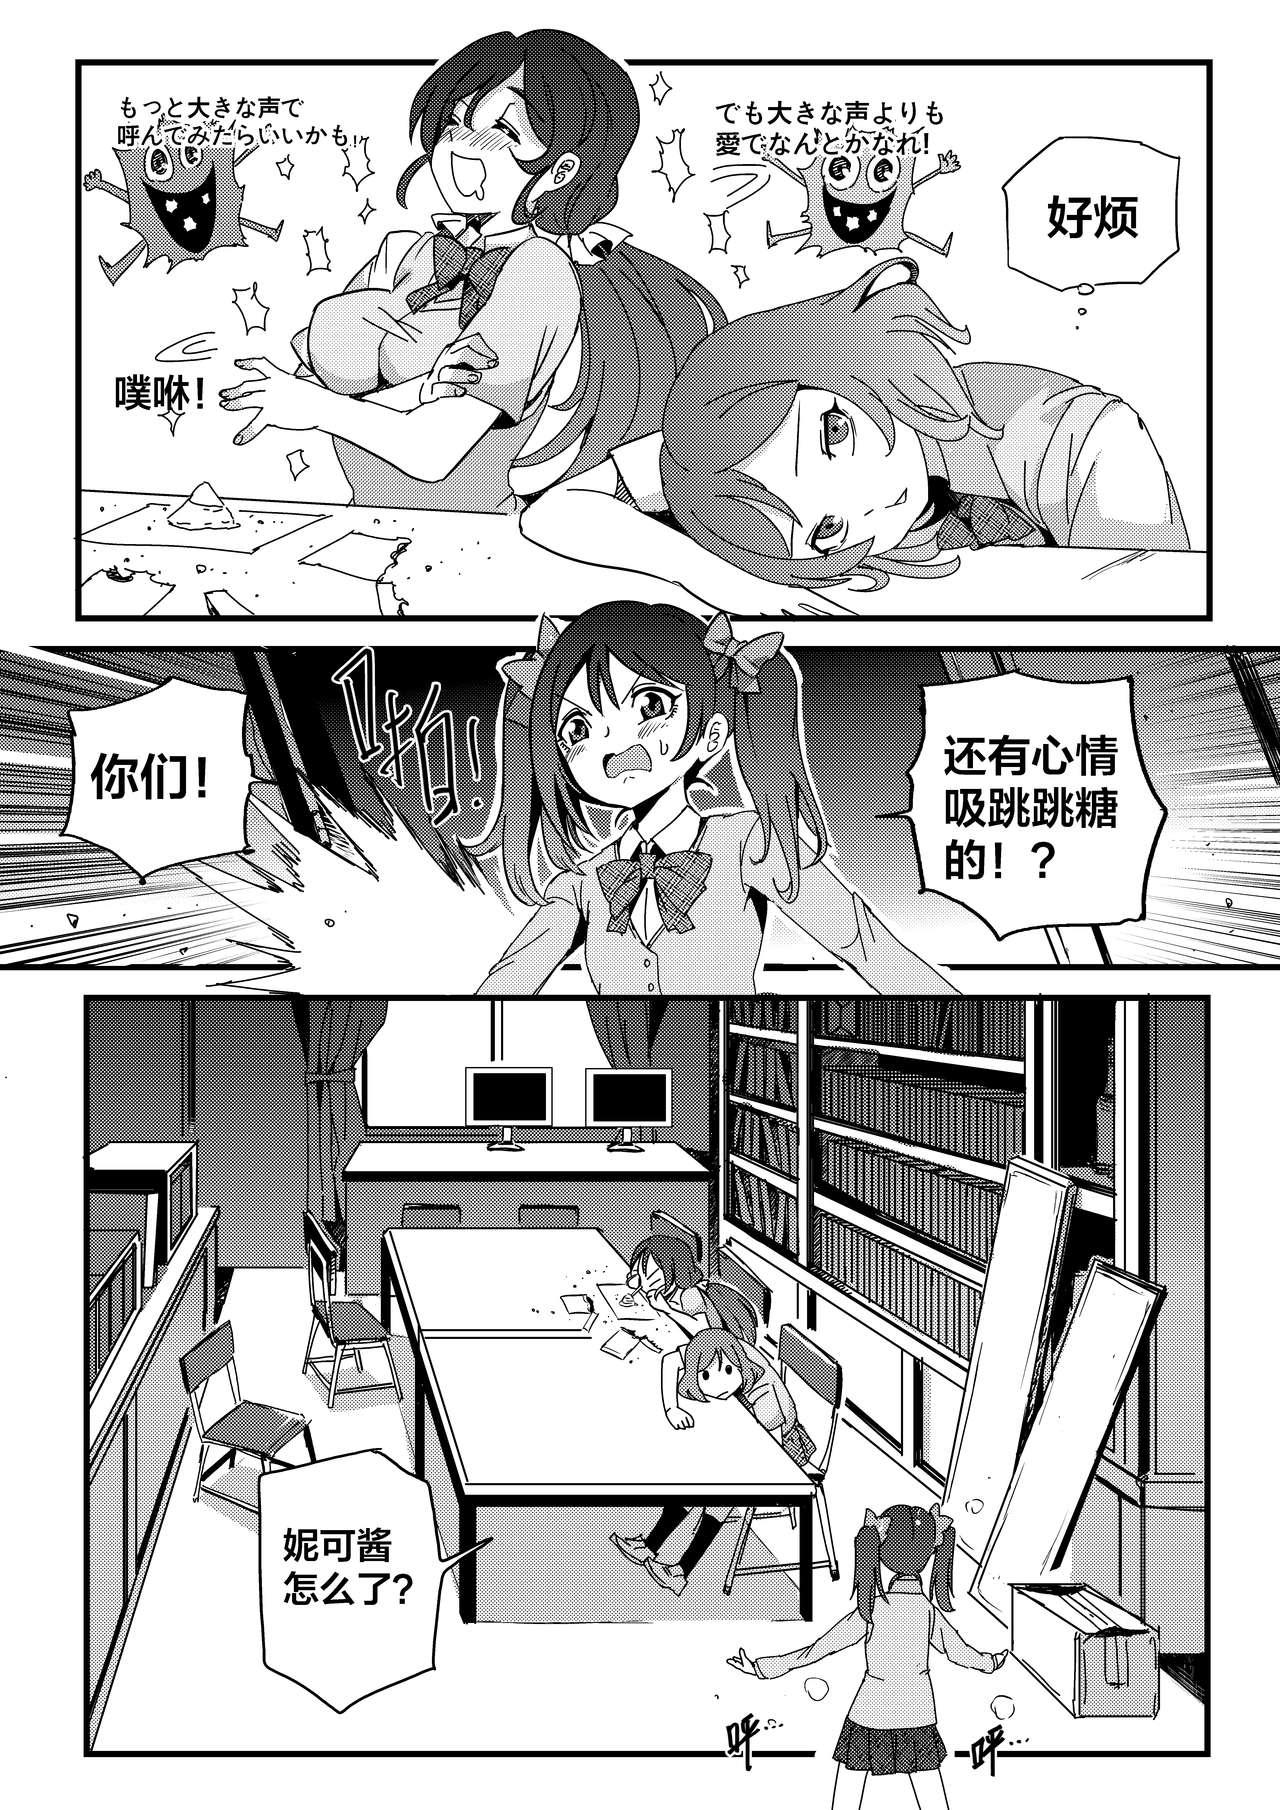 Deep 果胆卯威 - Kantai collection The idolmaster Love live Bedroom - Page 2